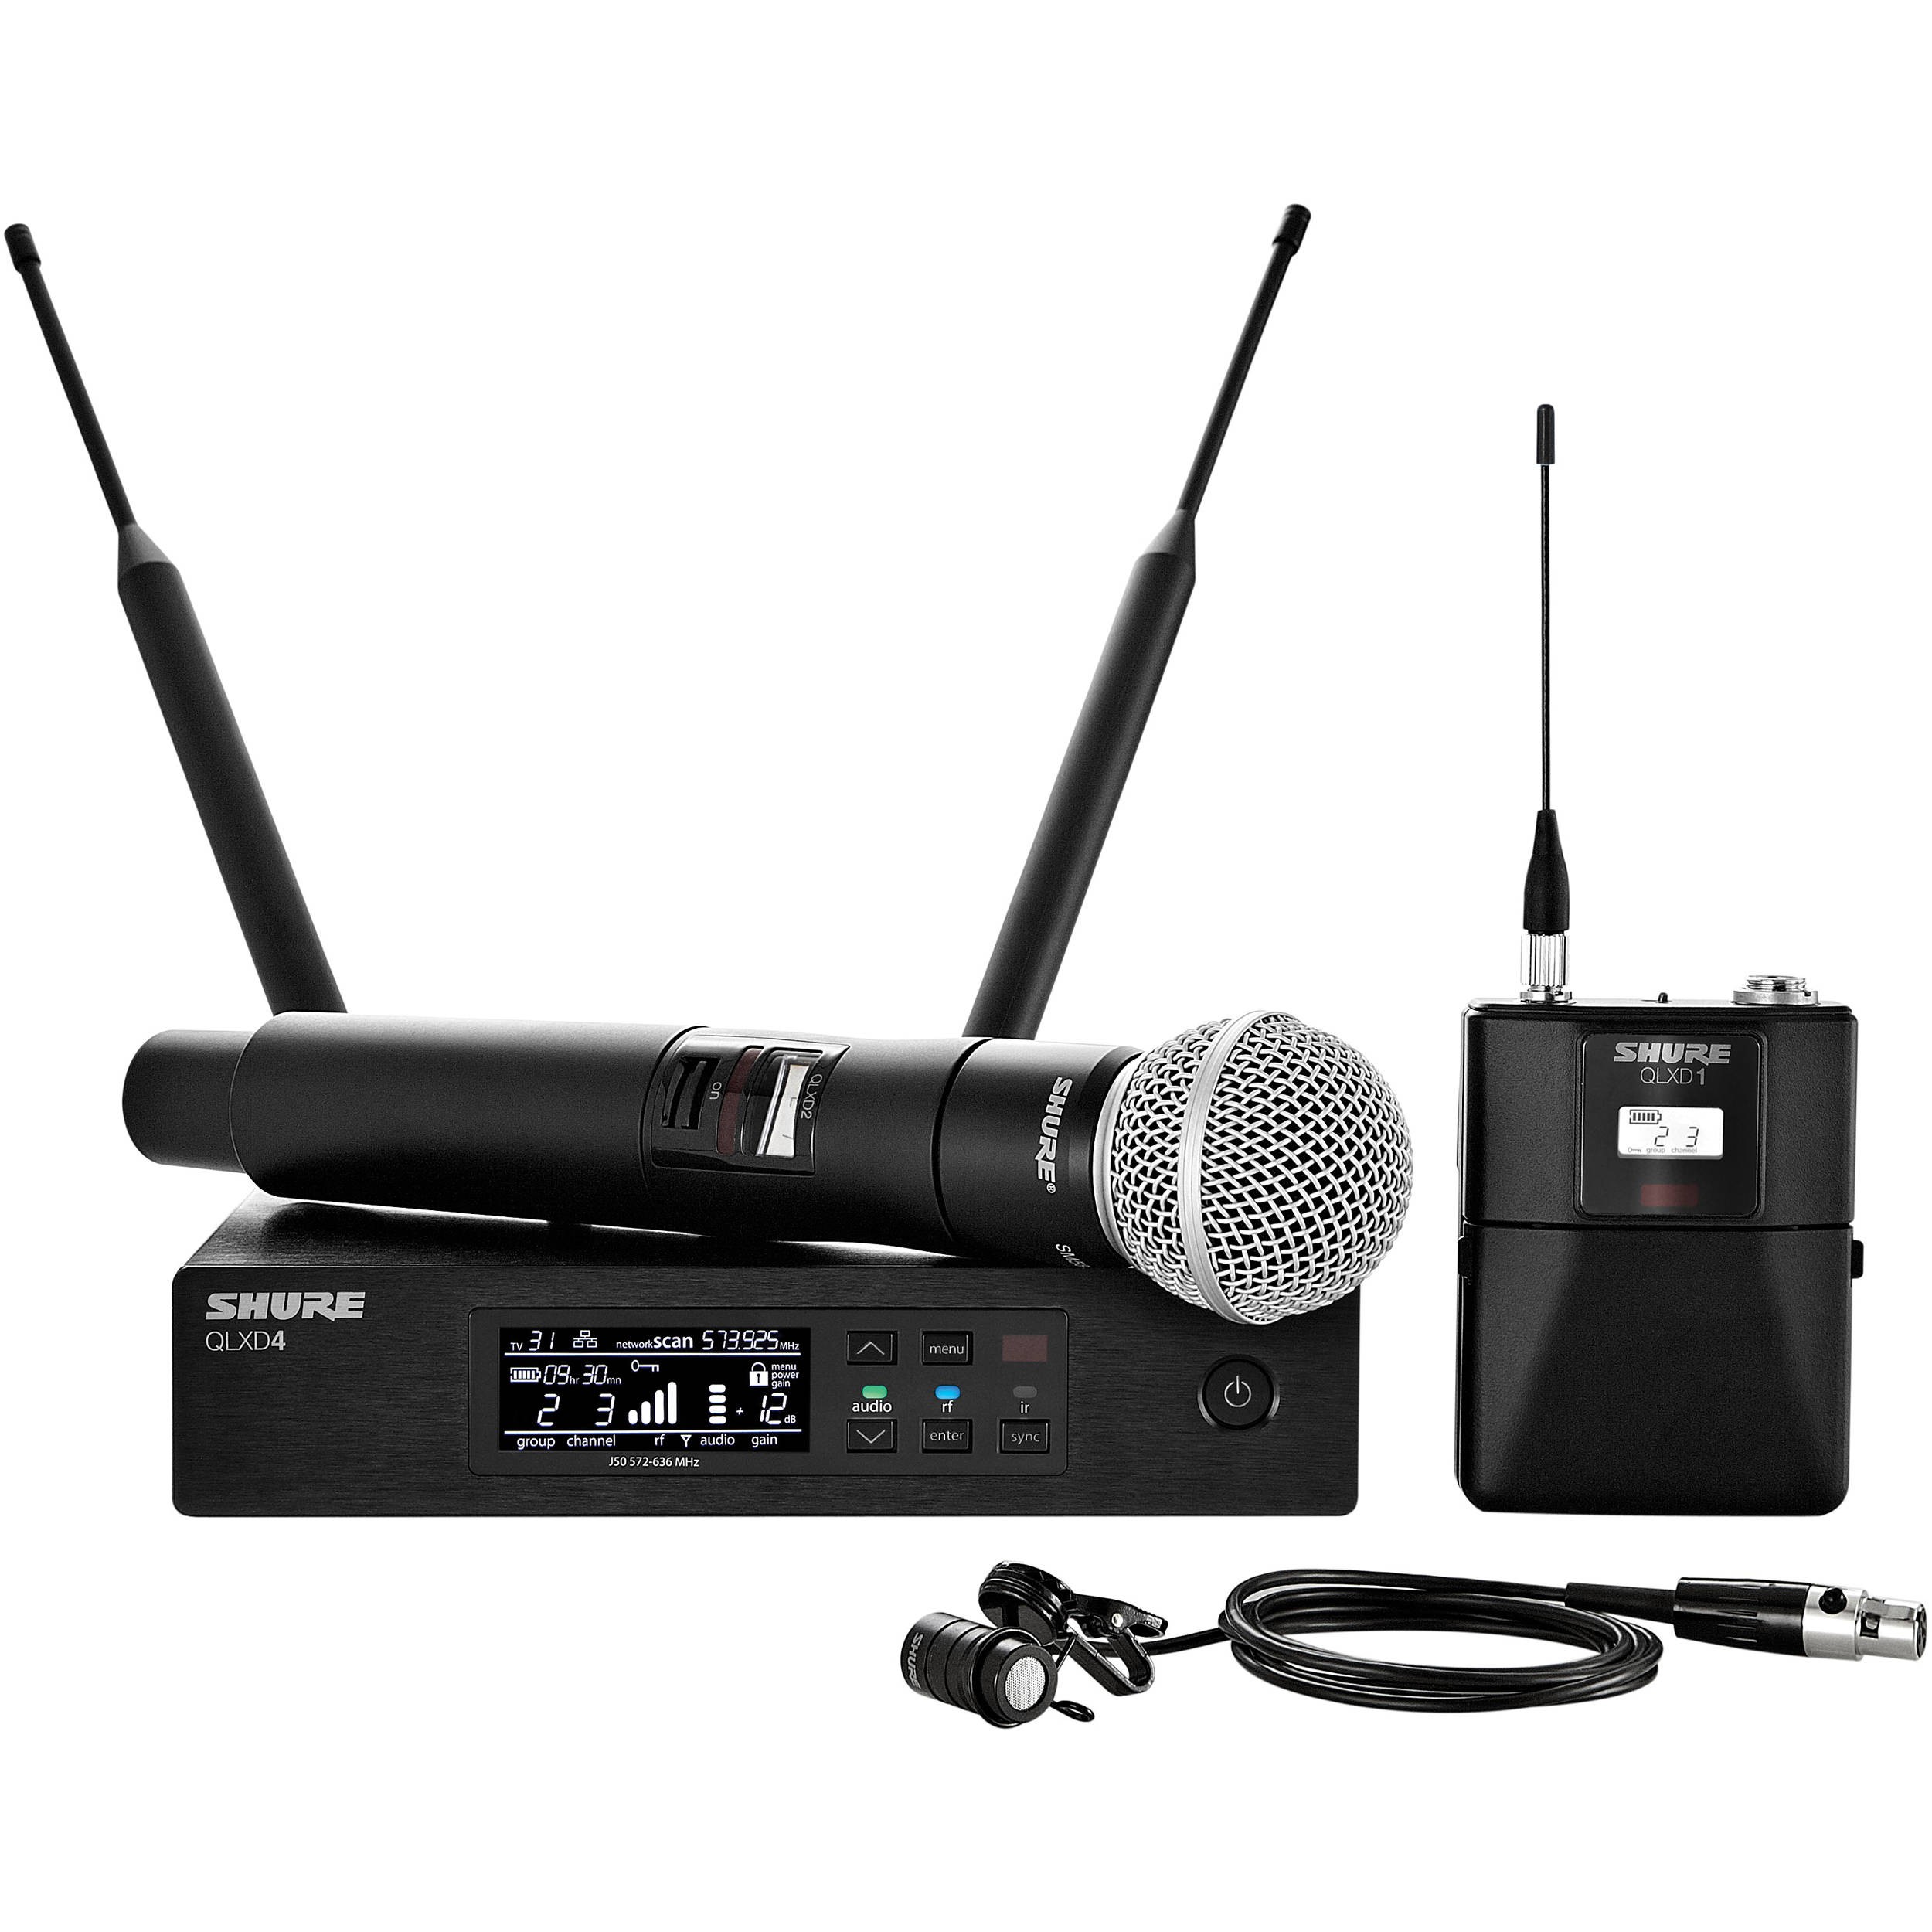 SHure QLXD Combo Handheld & Lavalier Wireless Microphone System